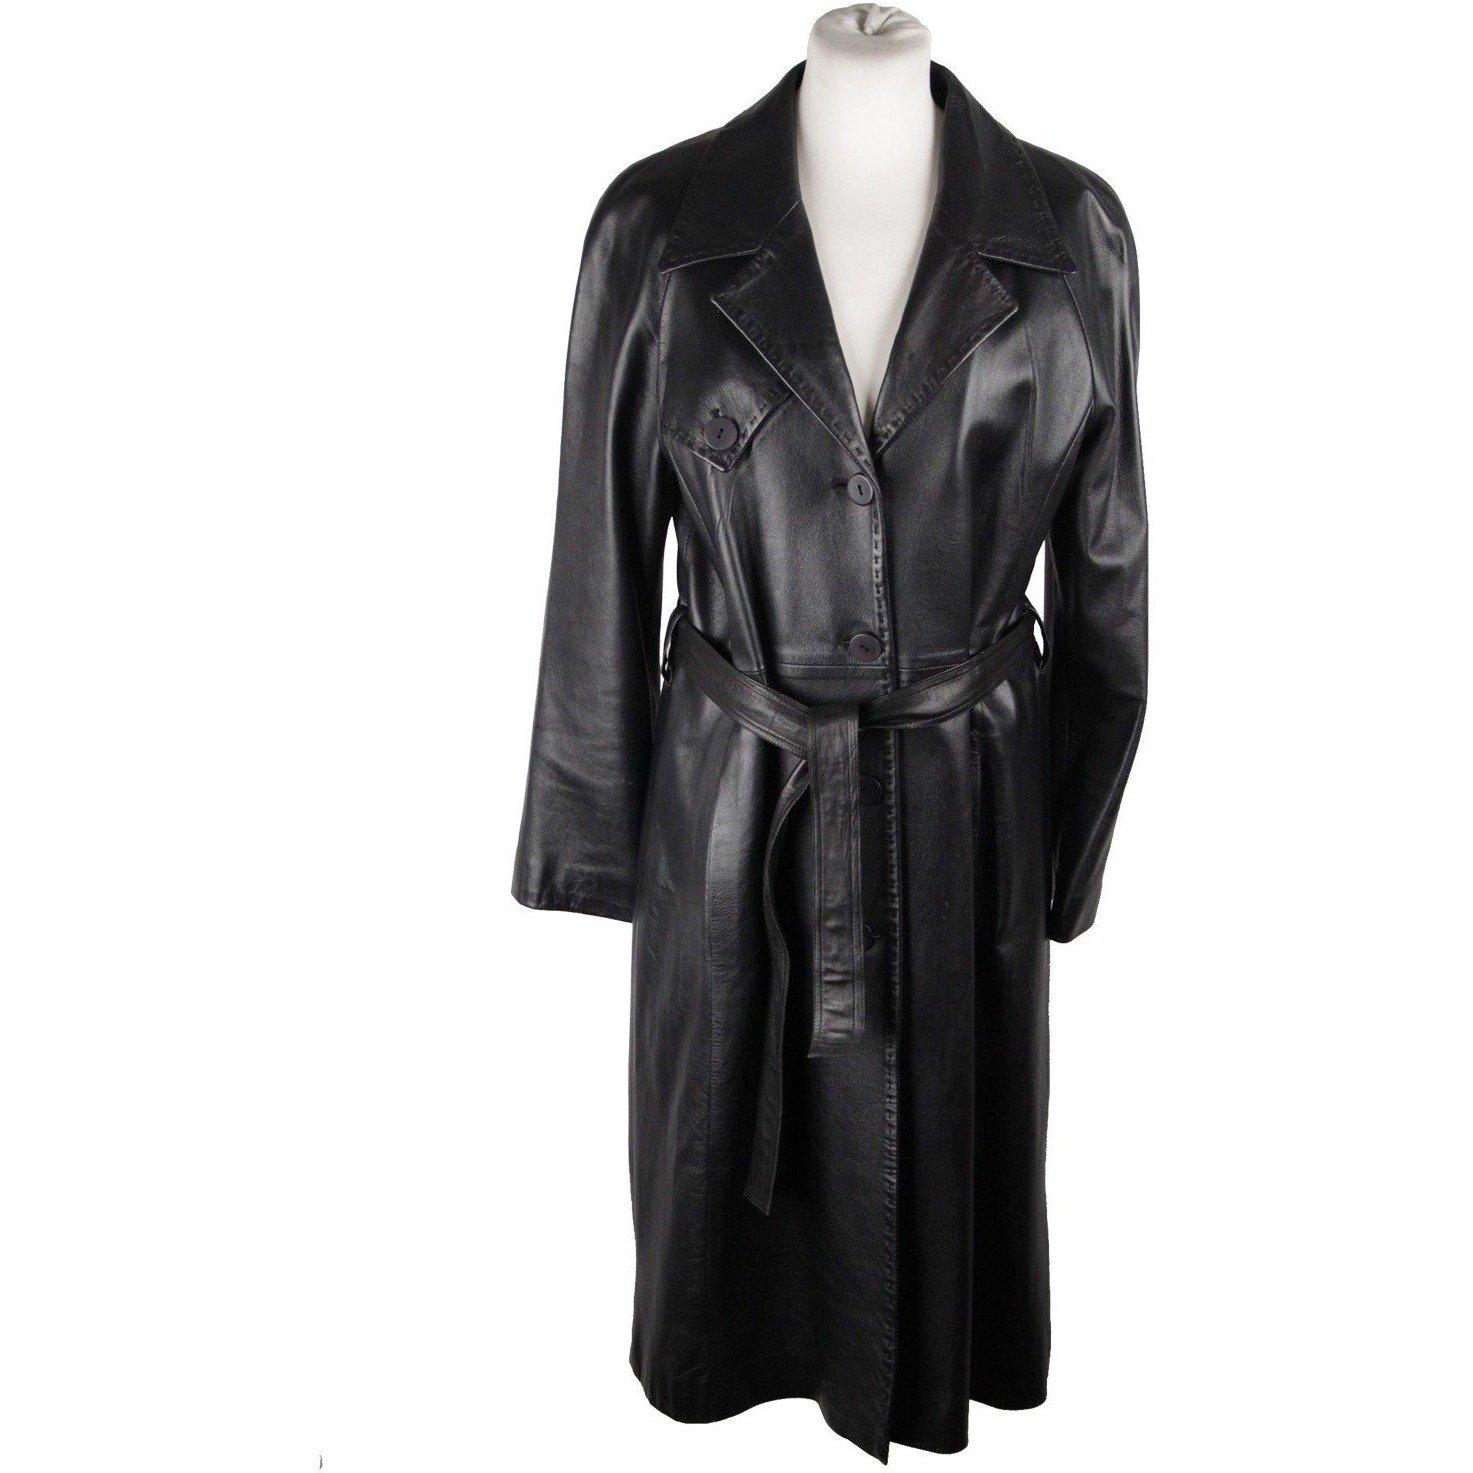 - AMINA RUBINACCI- made in Italy
- Button closure on the front
- Side pockets
- Rear vent
- Belted waistline
- Stitching detailing
- Fabric / Material: Genuine leather
- Color / Effect: Black Internal lining (color, fabric): Black lining
- Size: 42